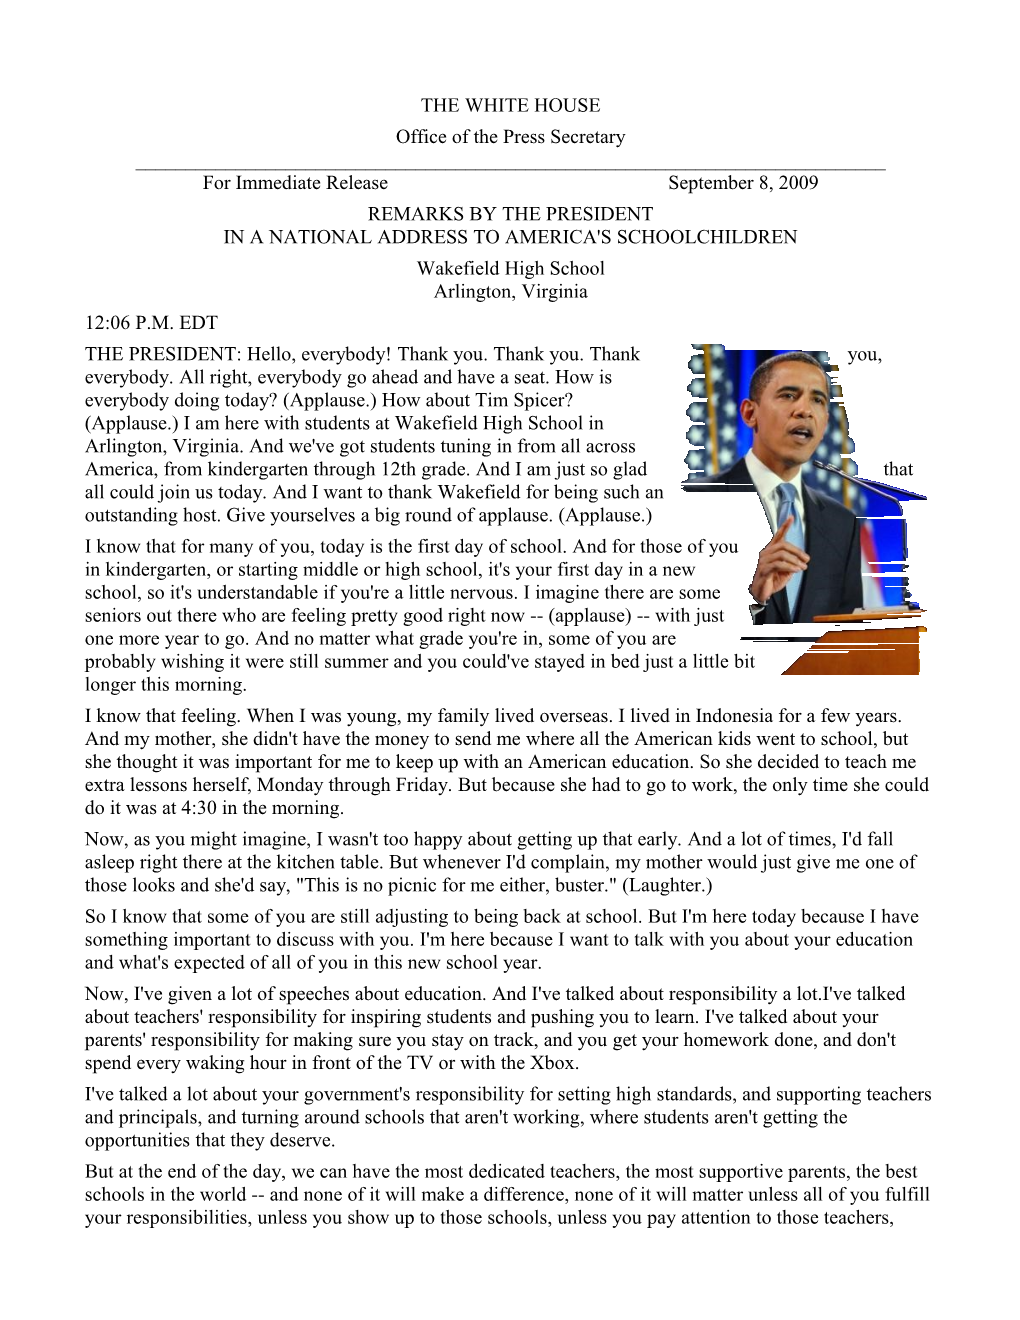 Remarks by the President in a National Address to America's Schoolchildren